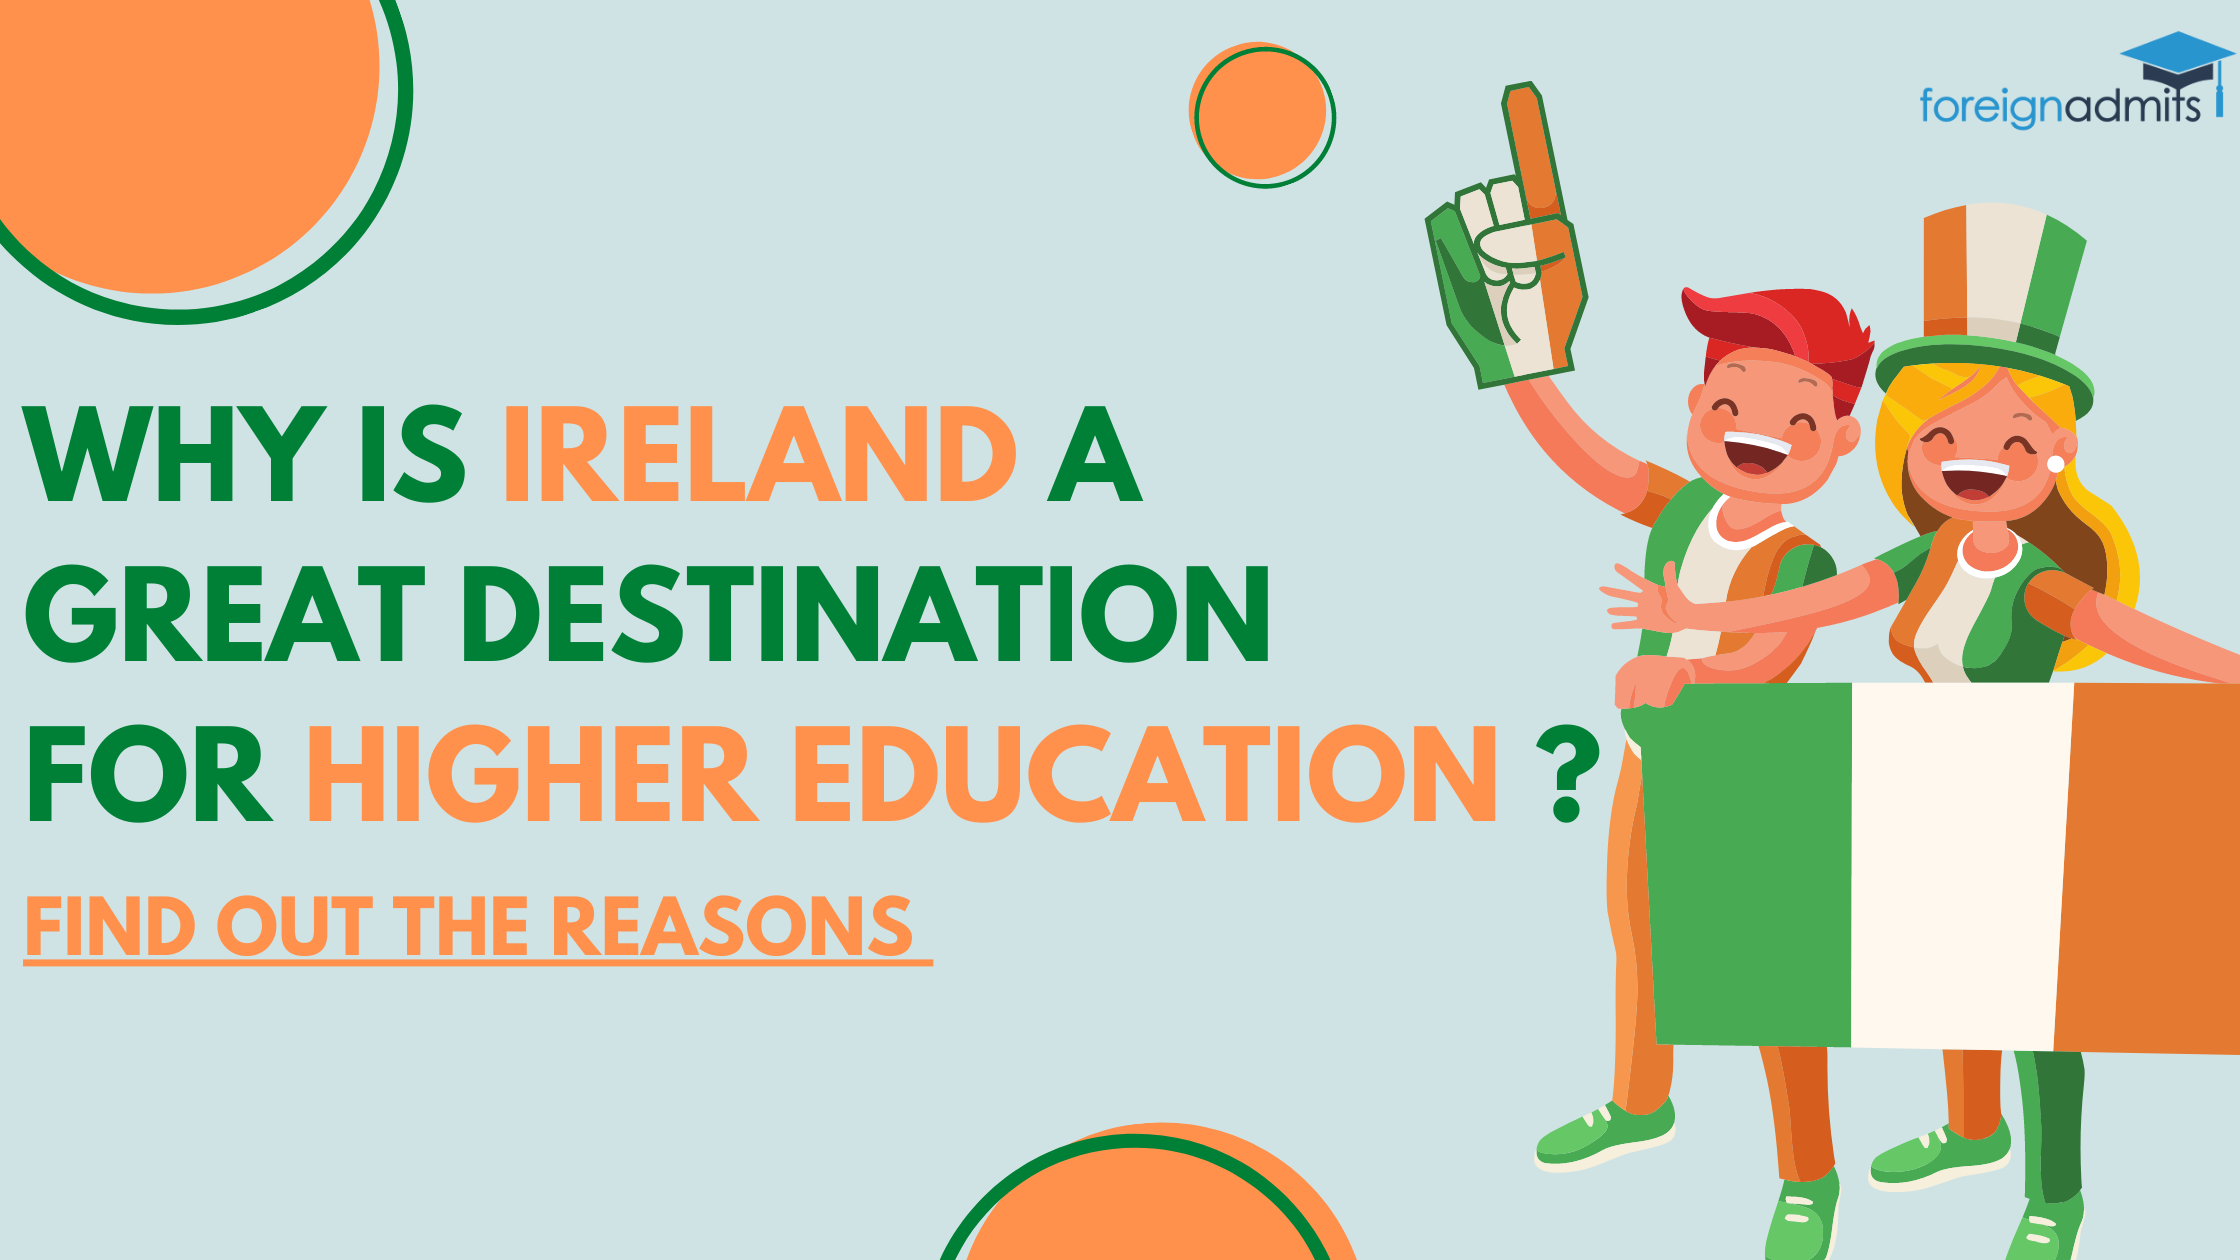 Why is Ireland a Great Destination for Higher Education?